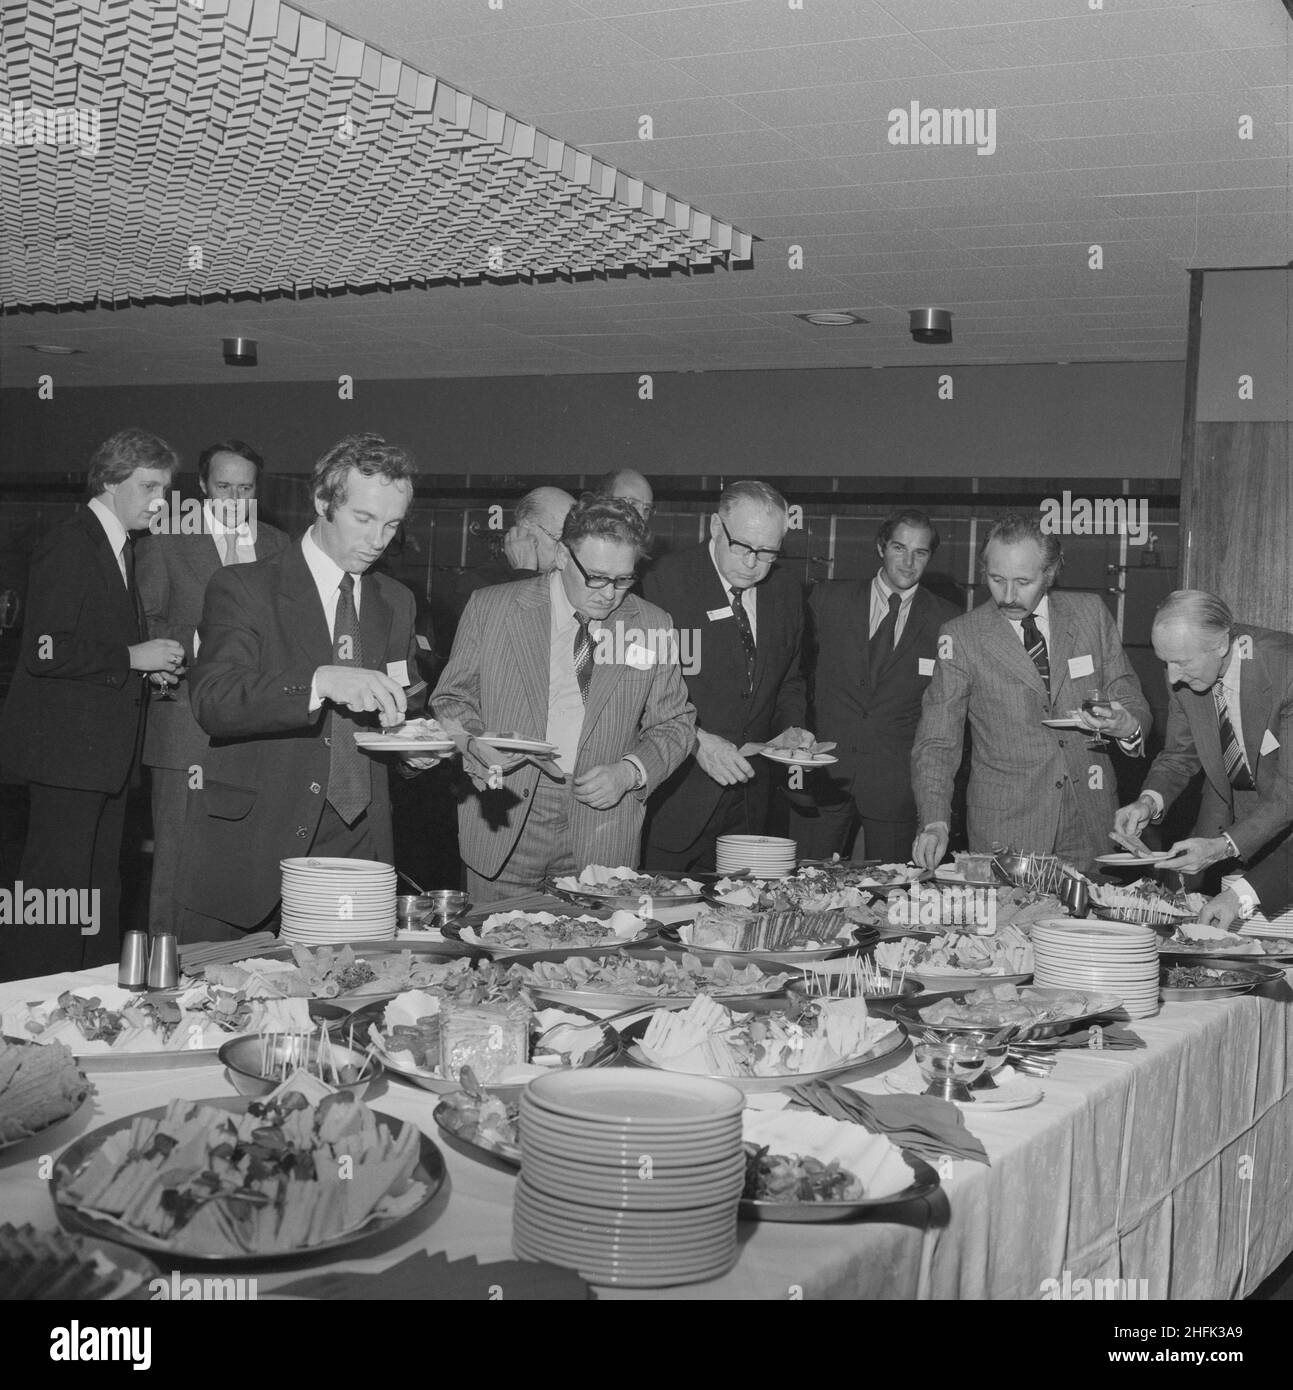 Retirement celebration for W G Cursons in Manchester, 29/09/1976. Guests helping themselves to party food during the retirement celebration for W G Cursons in Manchester.  W G Cursons was a Laing Regional Director for the north-west. He retired in 1976 with 45 years of service to the Company. Stock Photo